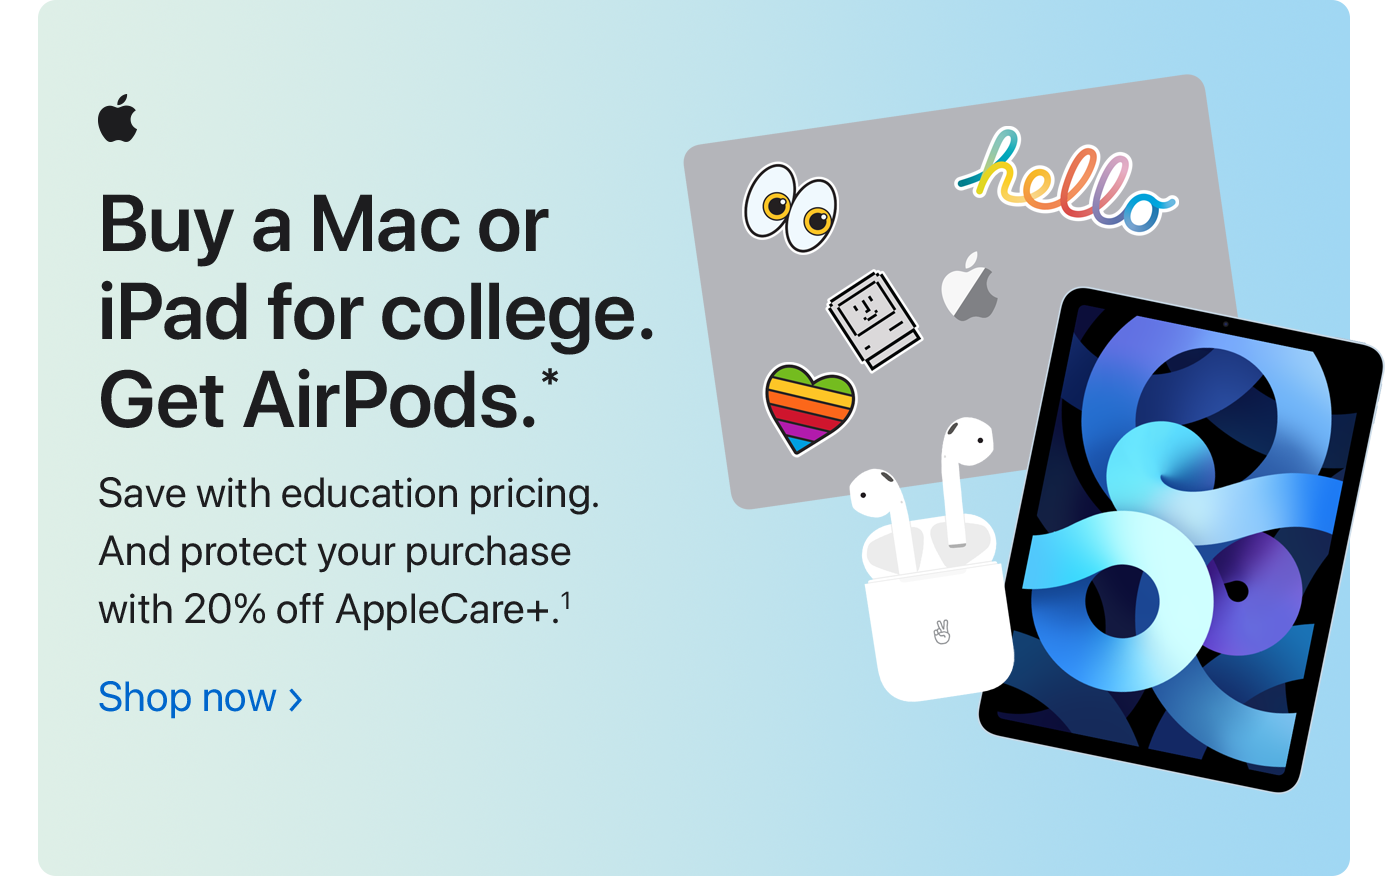 Buy a Mac or iPad for college. Get AirPods.* Save with education pricing. And protect your purchase with 20% off AppleCare+.(1) Shop now